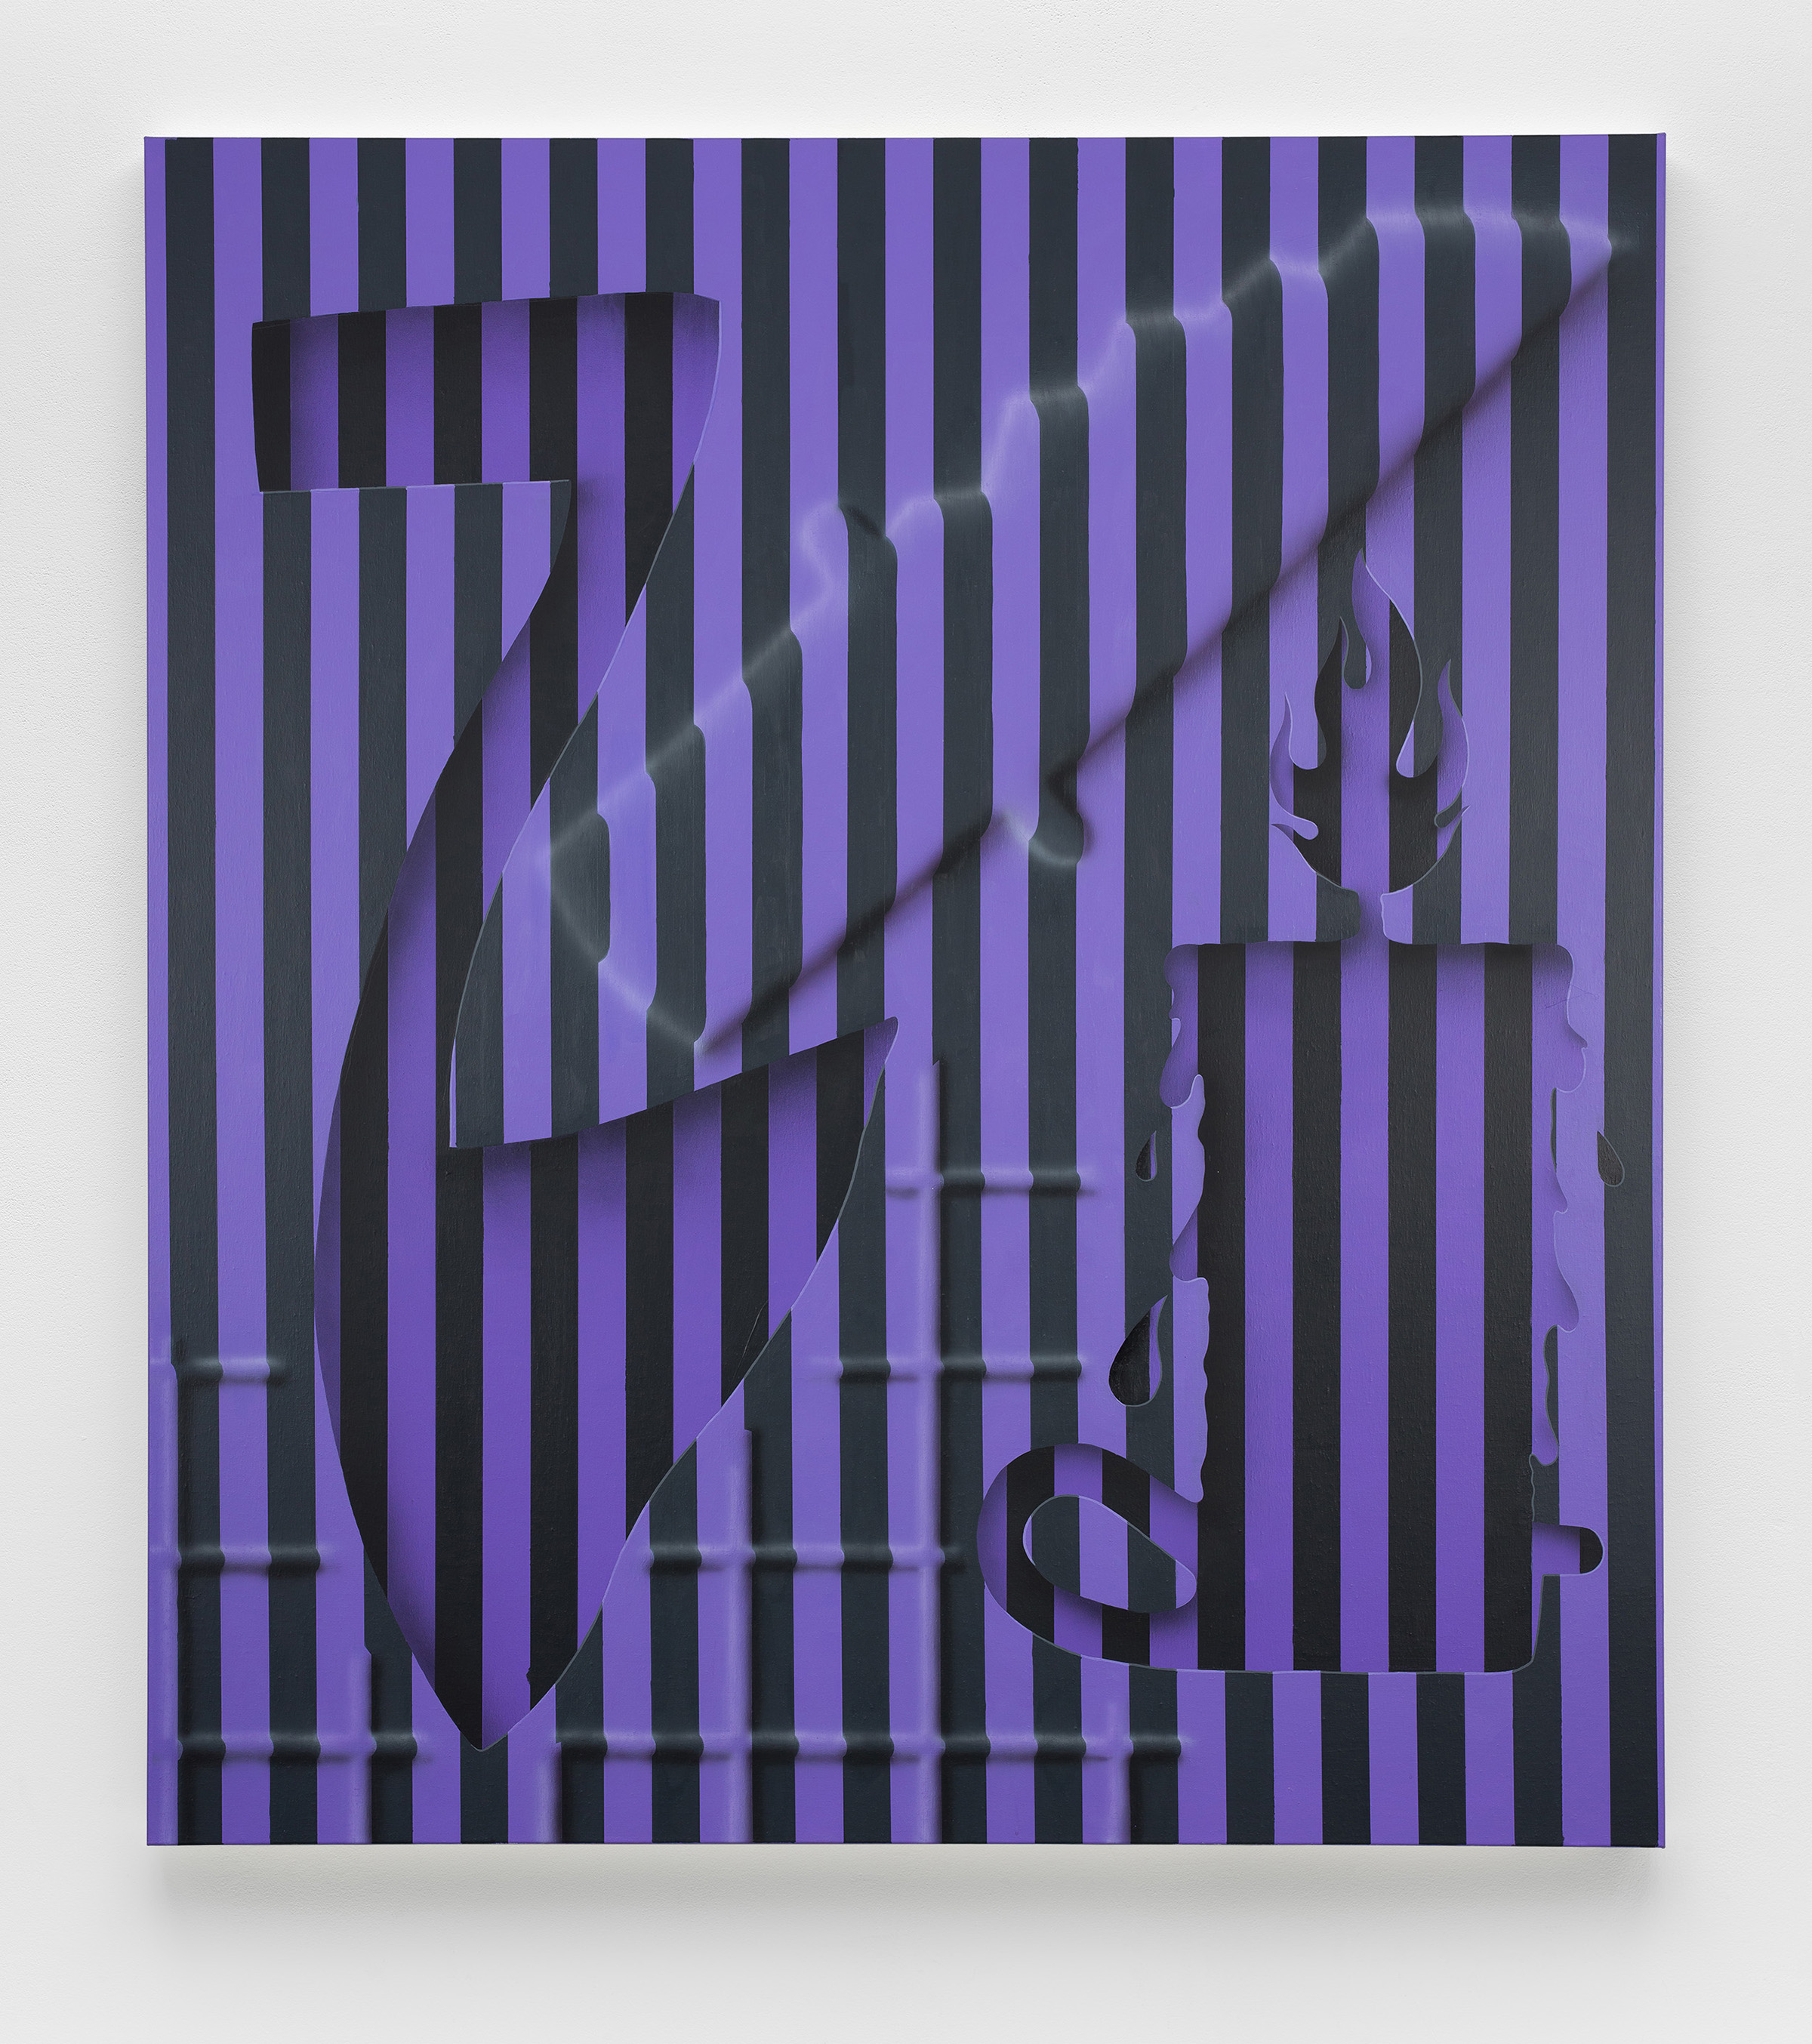 Charline Tyberghein, Let’s get this dread, 2022, acrylic on canvas, 180 x 150 cm, 70 7/8 x 59 in.